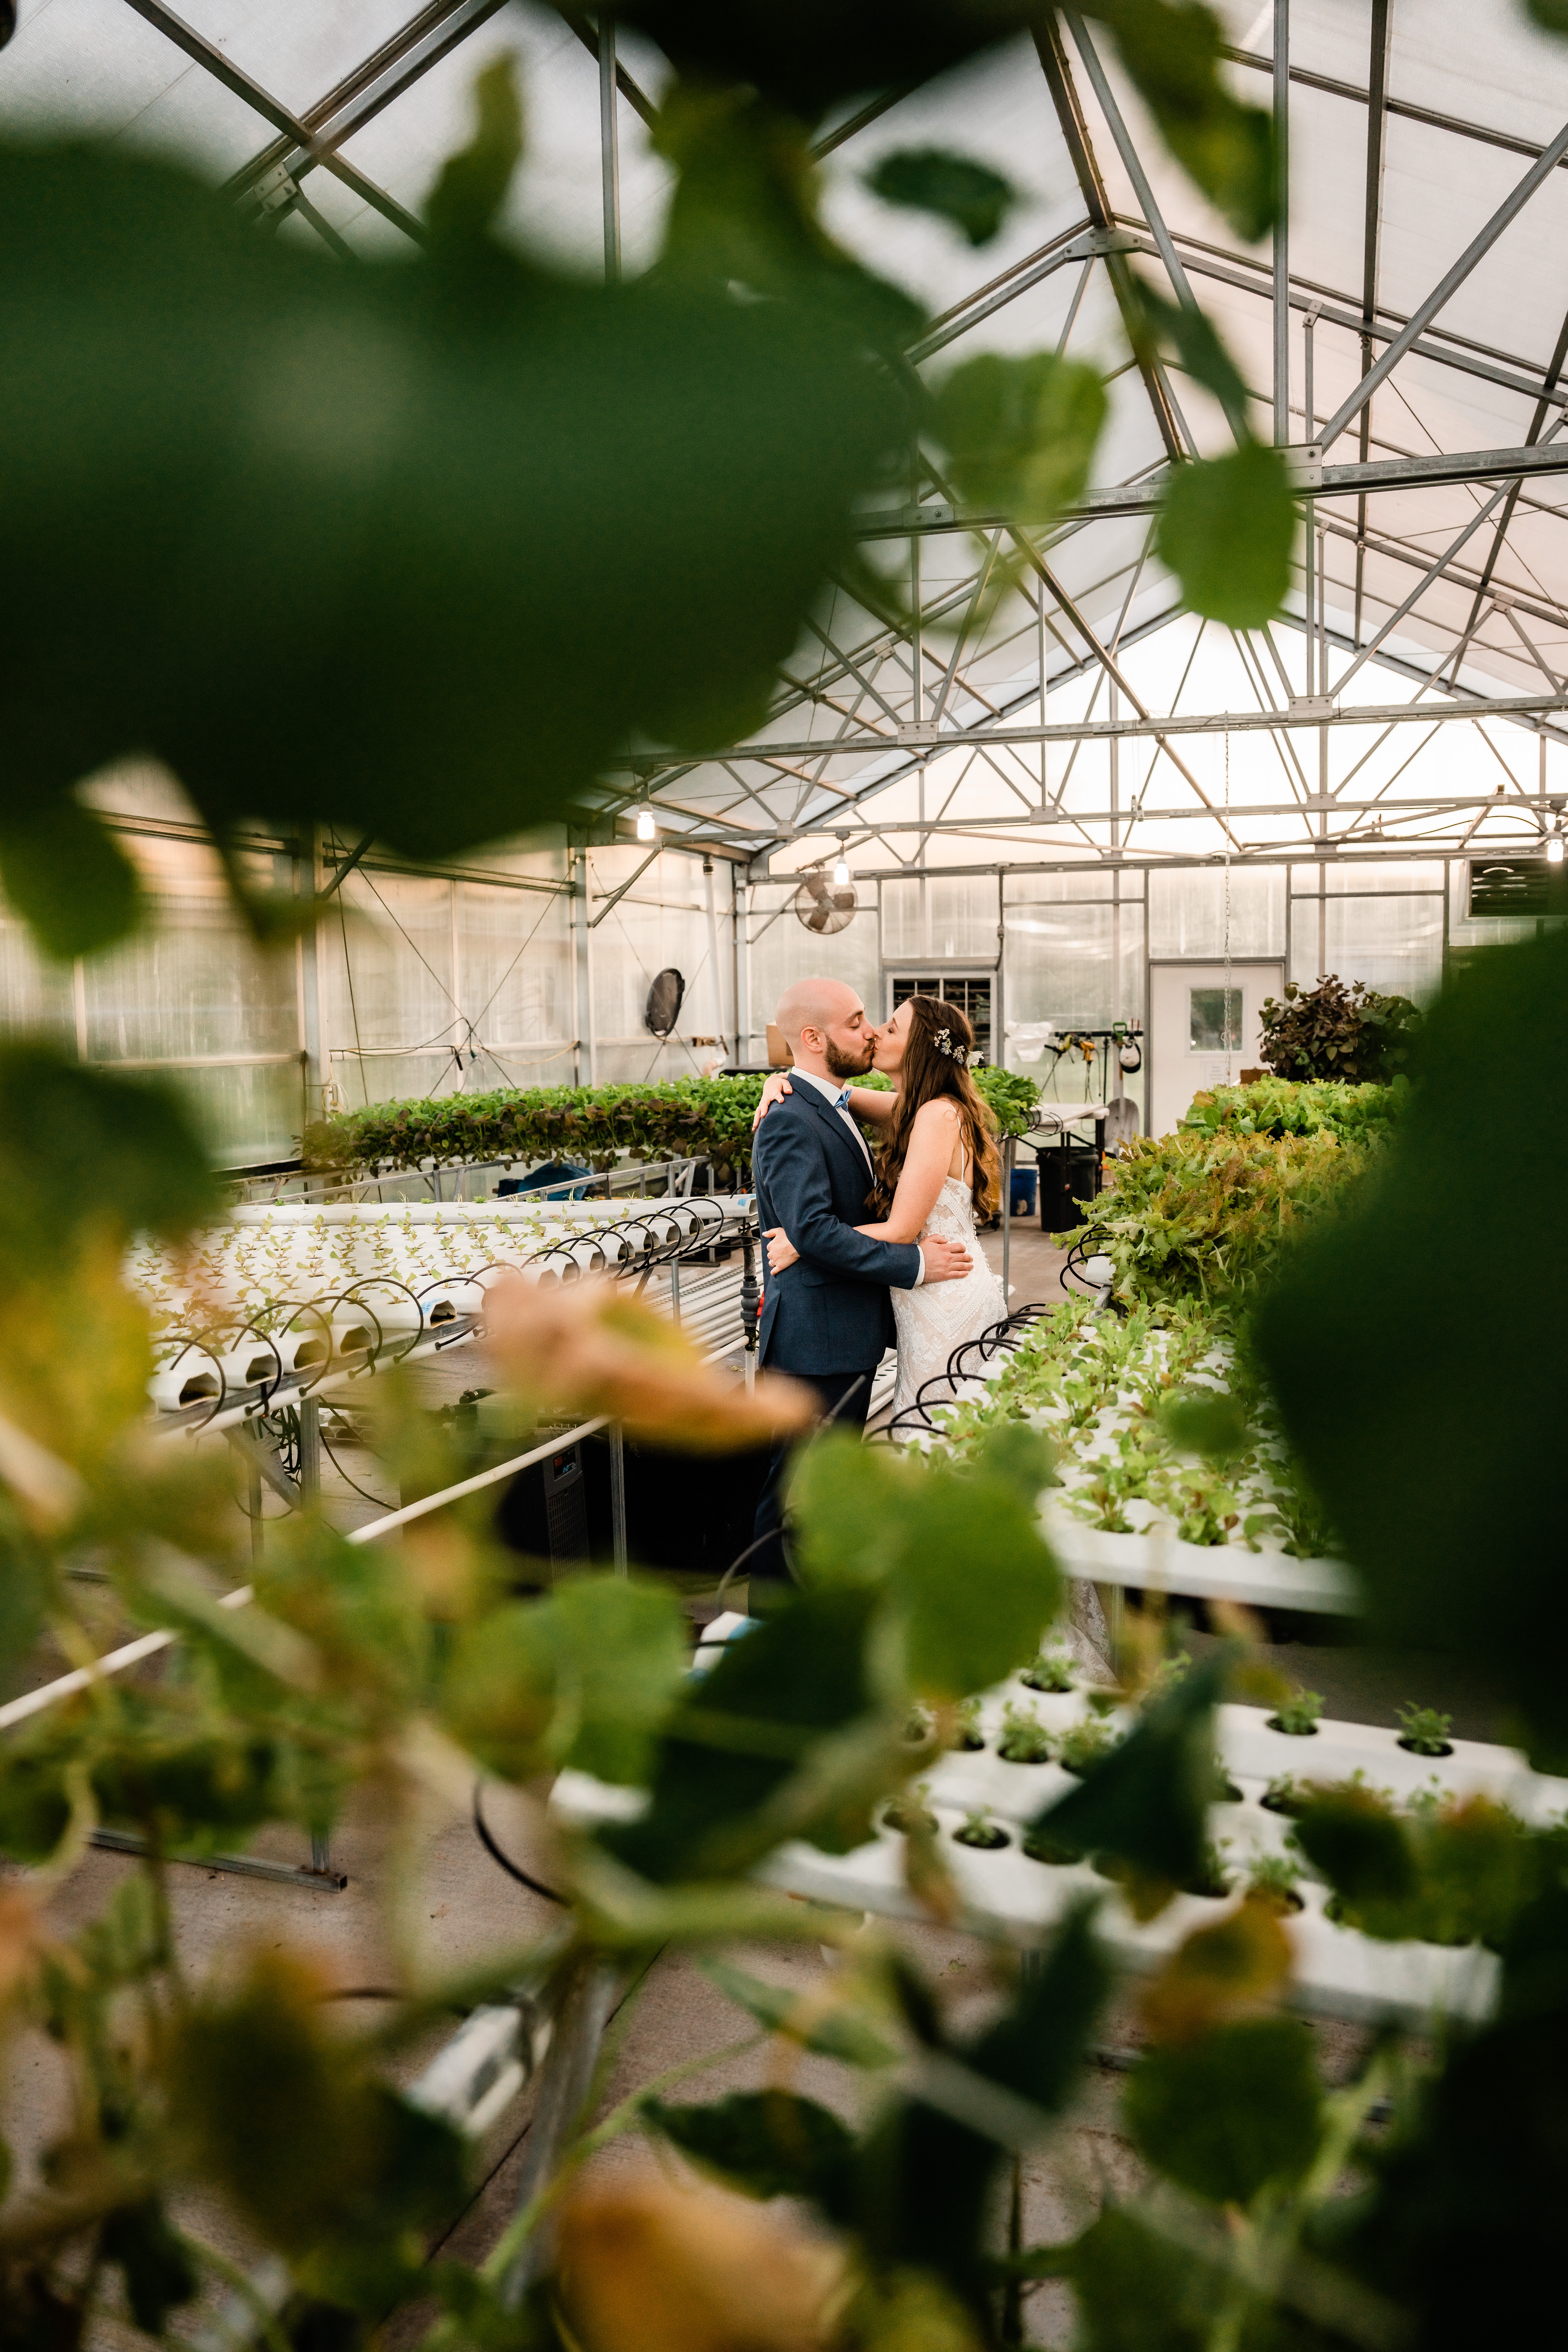 The Barn at Perona Farms, Perona Farms Wedding, New Jersey Wedding Photographer, Sussex County Wedding Photographer, NJ Wedding Photographer, Sussex County NJ Photographer, New Jersey Wedding Venues, Sussex County Wedding Venue, Wedding Inspiration, Wedding Planning, Wedding Ideas, Unique Wedding Photos, Wedding Photo Ideas, Boho Wedding, Farm Wedding, Bride and groom kissing in the Perona Farms greenhouse in Andover NJ